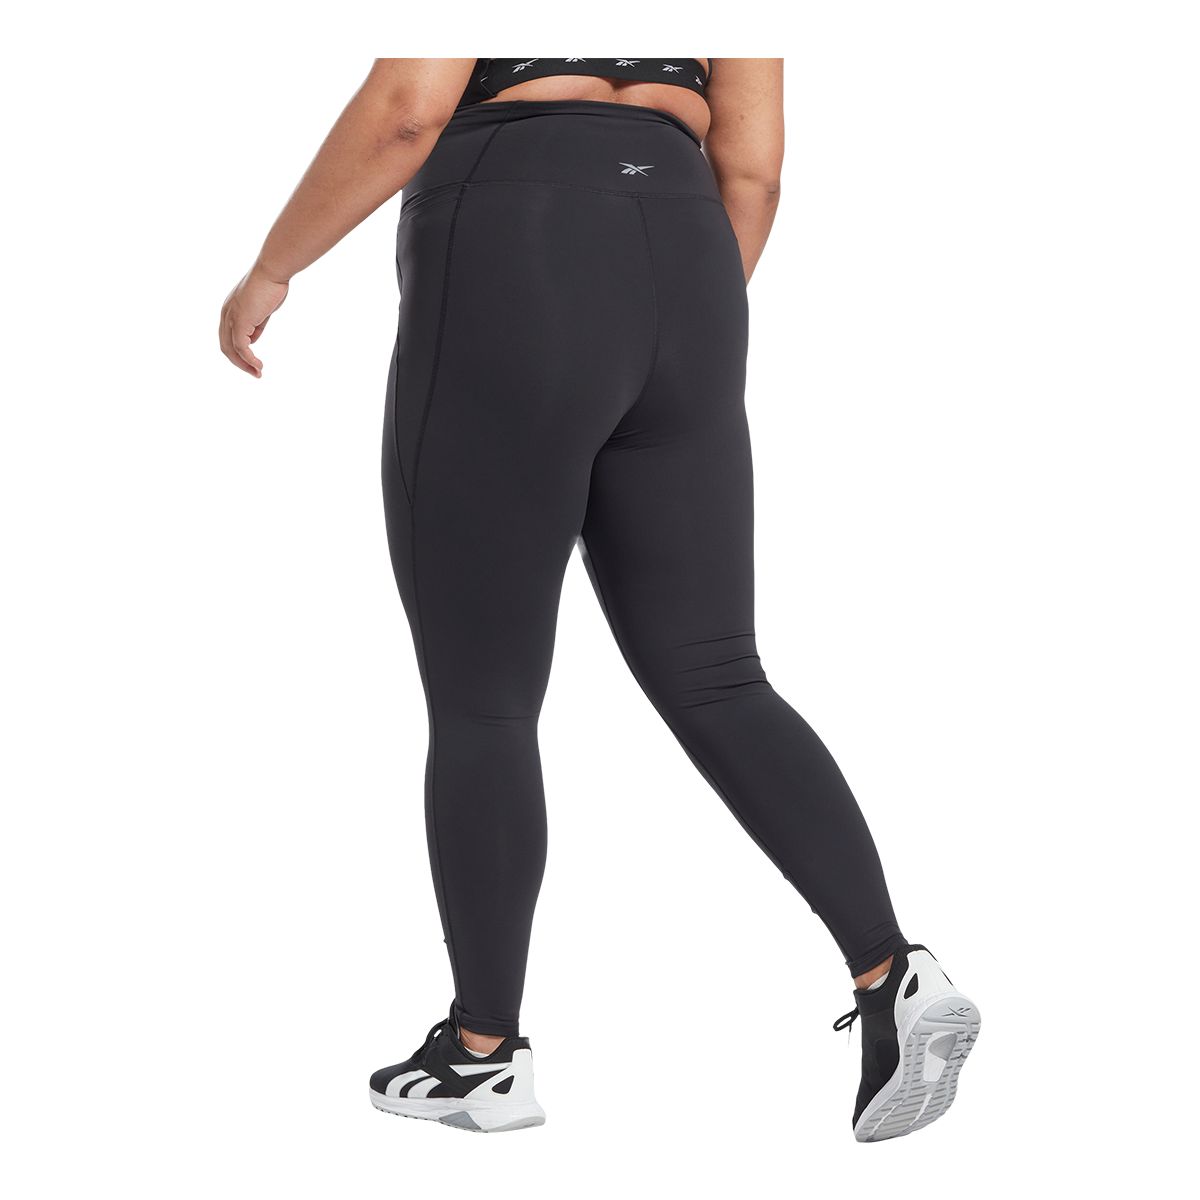 https://media-www.sportchek.ca/product/div-03-softgoods/dpt-70-athletic-clothing/sdpt-02-womens/334128338/reebok-women-s-lux-high-raise-tights-f80b2fca-cf35-4246-ab53-a2448ad43373-jpgrendition.jpg?imdensity=1&imwidth=1244&impolicy=mZoom